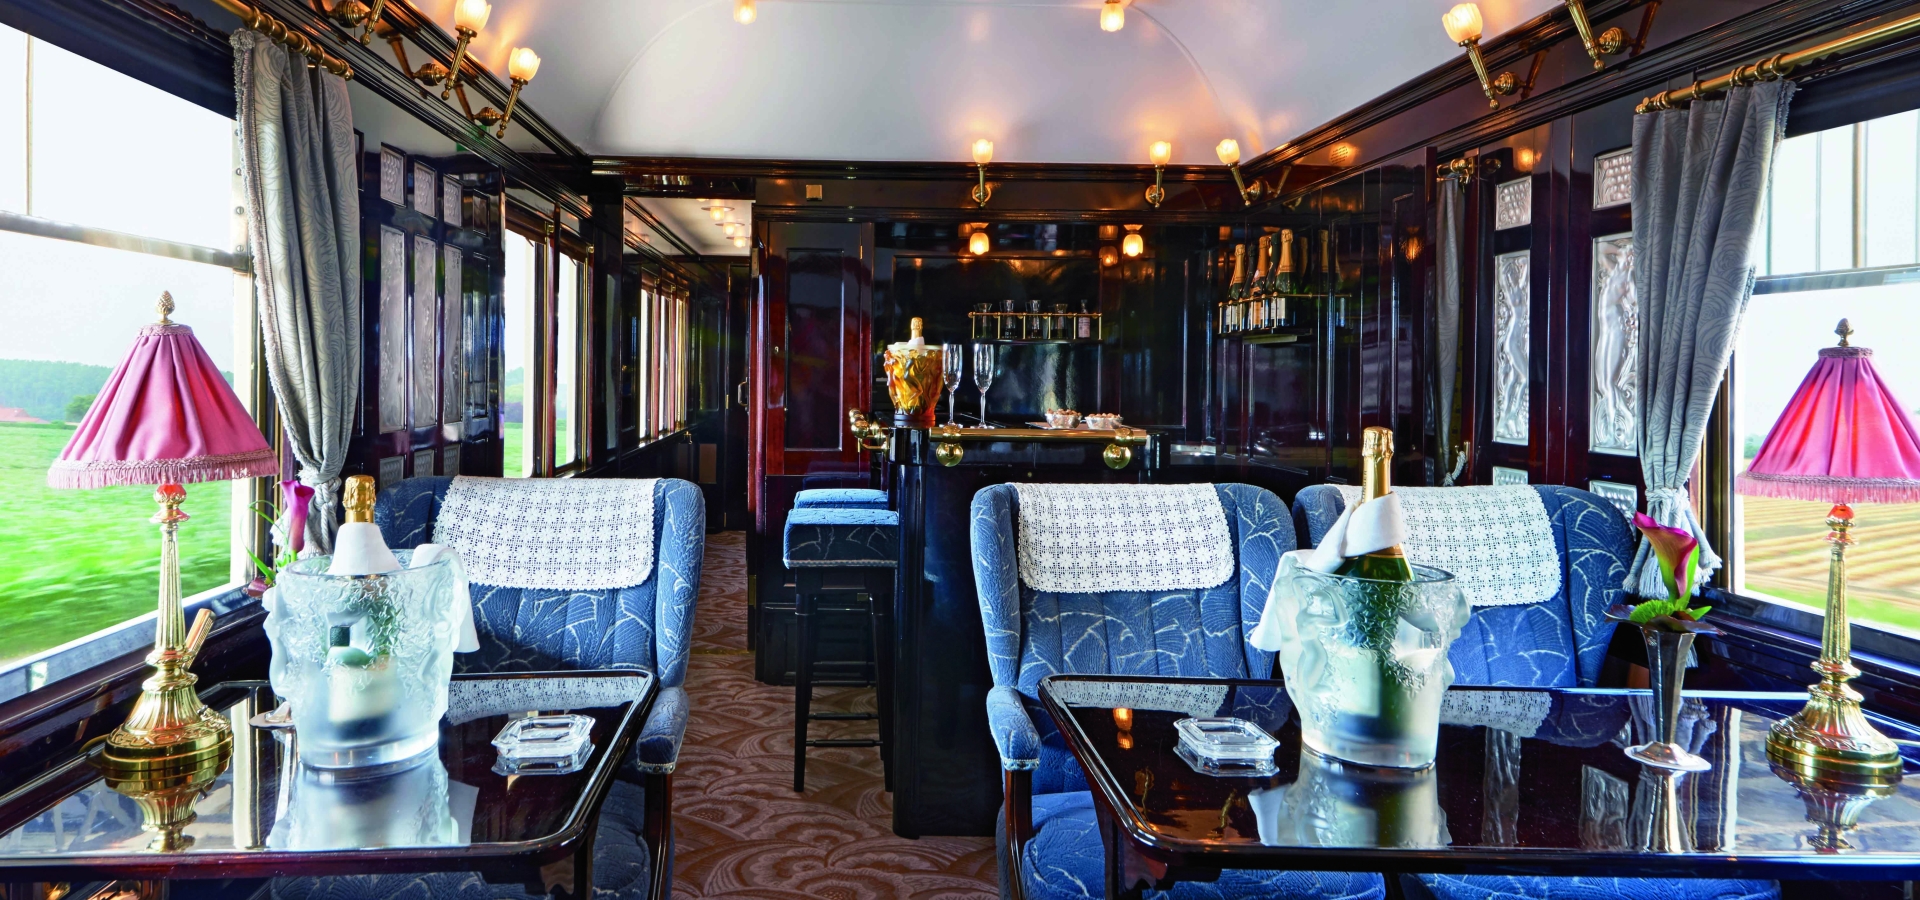 How does the width and length of the original Orient Express compare to  modern trains in the UK? - Quora